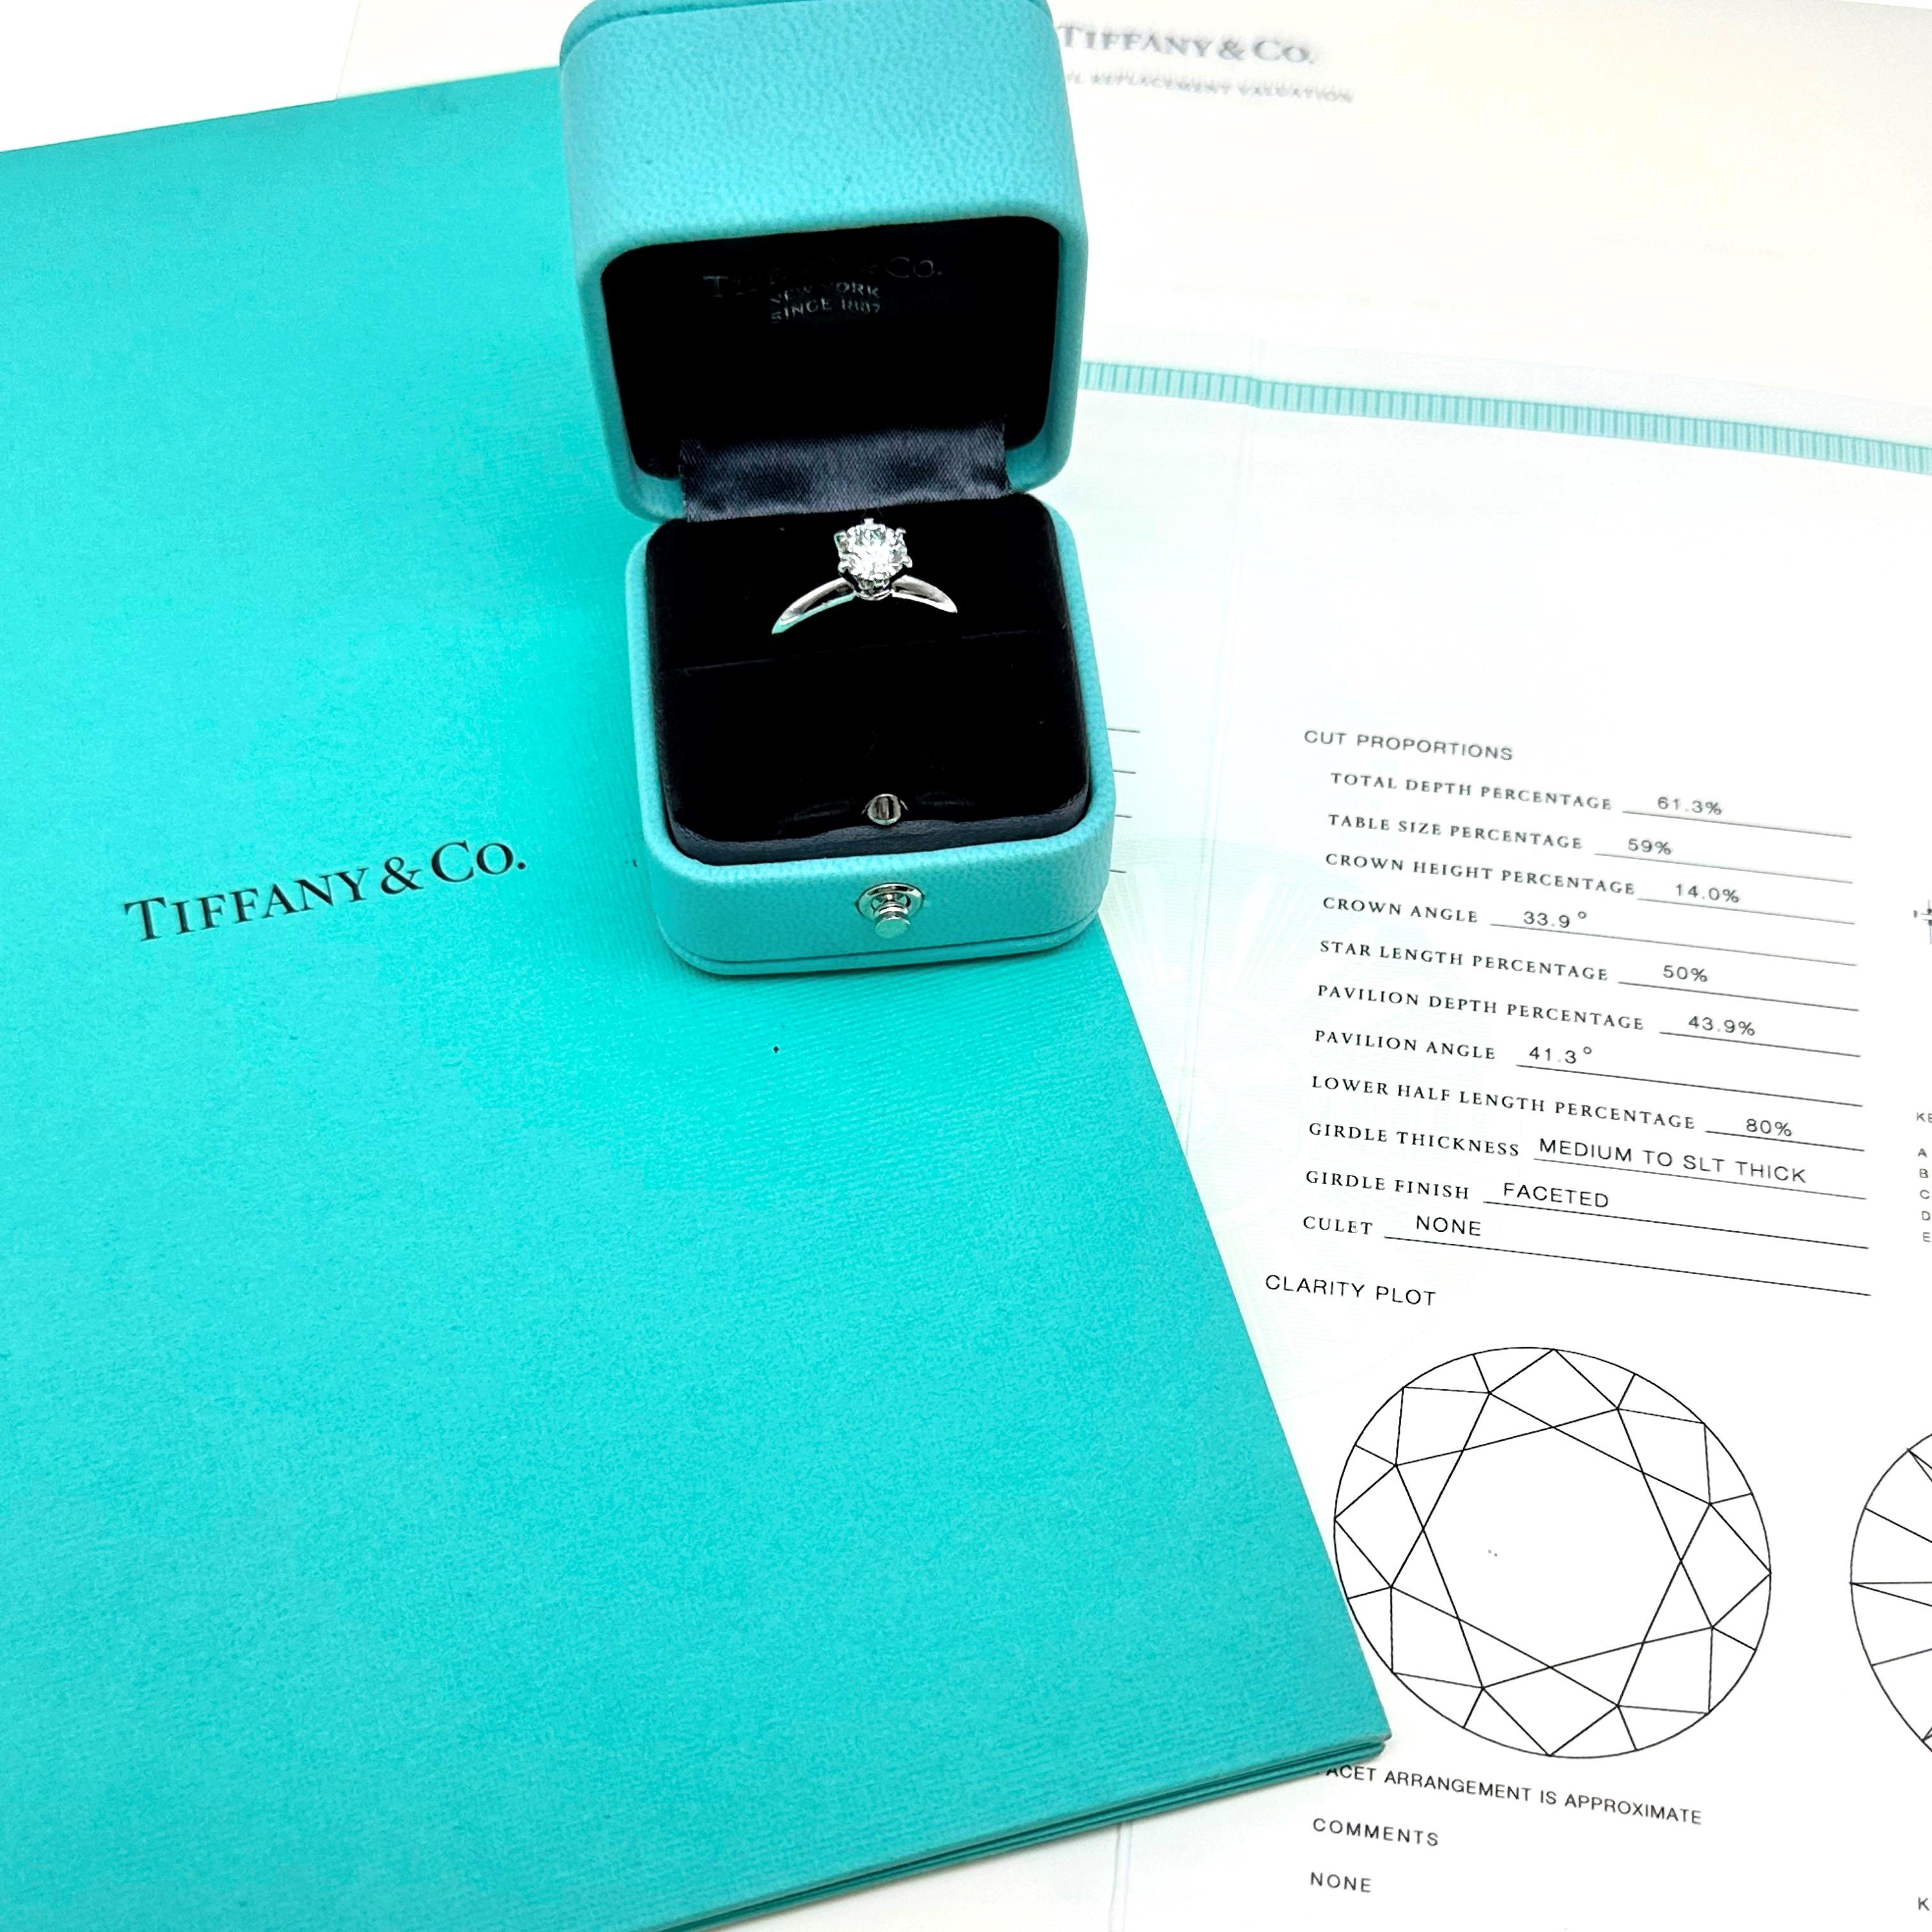 Tiffany & Co. Round Diamond 1.05 cts Solitaire Engagement Ring
Style:  6-Prong Tiffany Setting
T&C Number:  28272634/M03240373
Metal:  Platinum PT950
Size:  5.75 - sizable
TCW:  1.05 cts
Main Diamond:  Round Brilliant Diamond
Color & Clarity:  I,